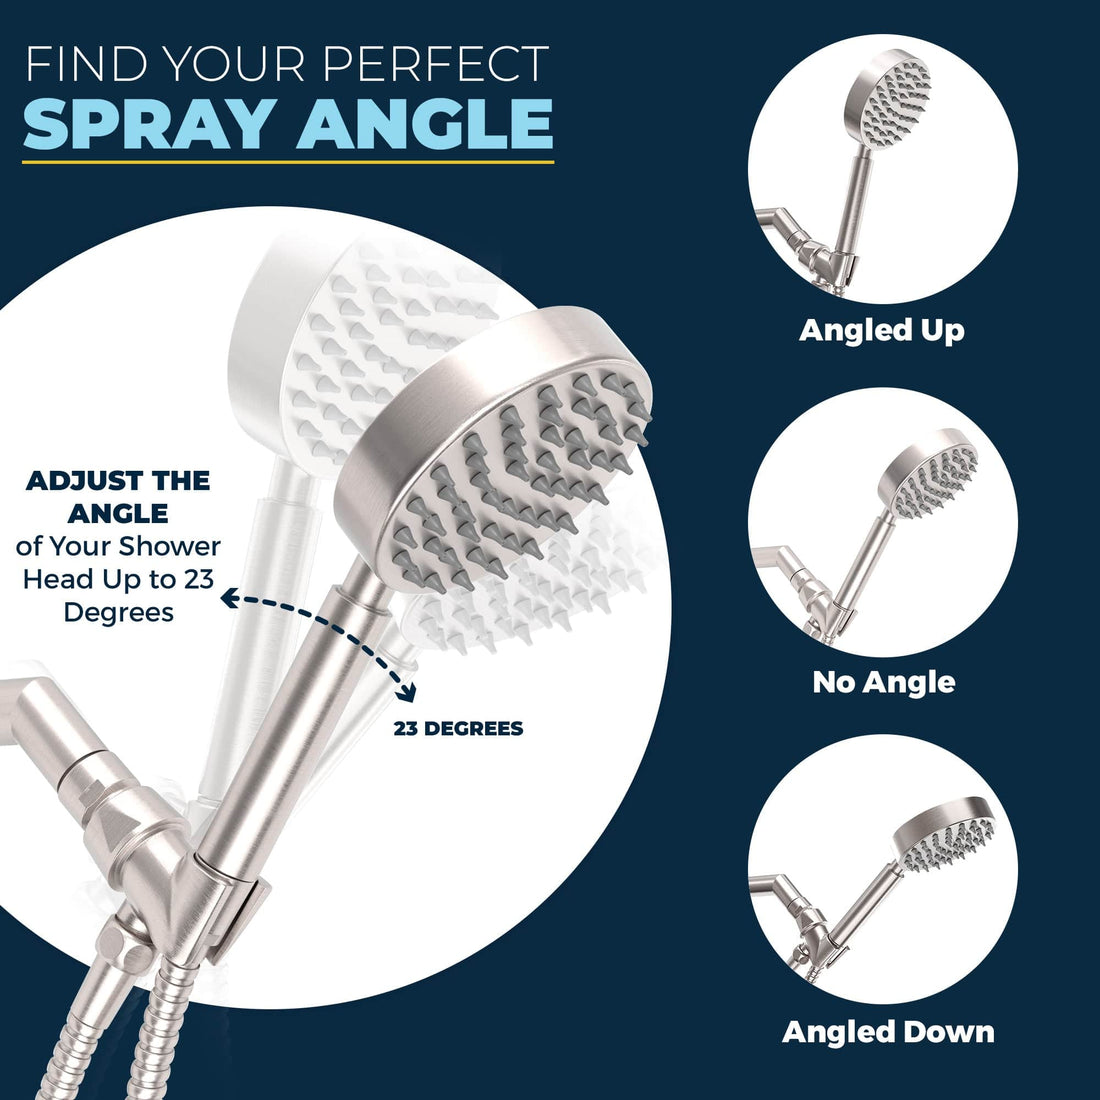 Perfect Spray Angle Valve and Trim, Low Flow 1-Spray Handheld and 7" Shower Arm Brushed Nickel  / 1.75 - The Shower Head Store